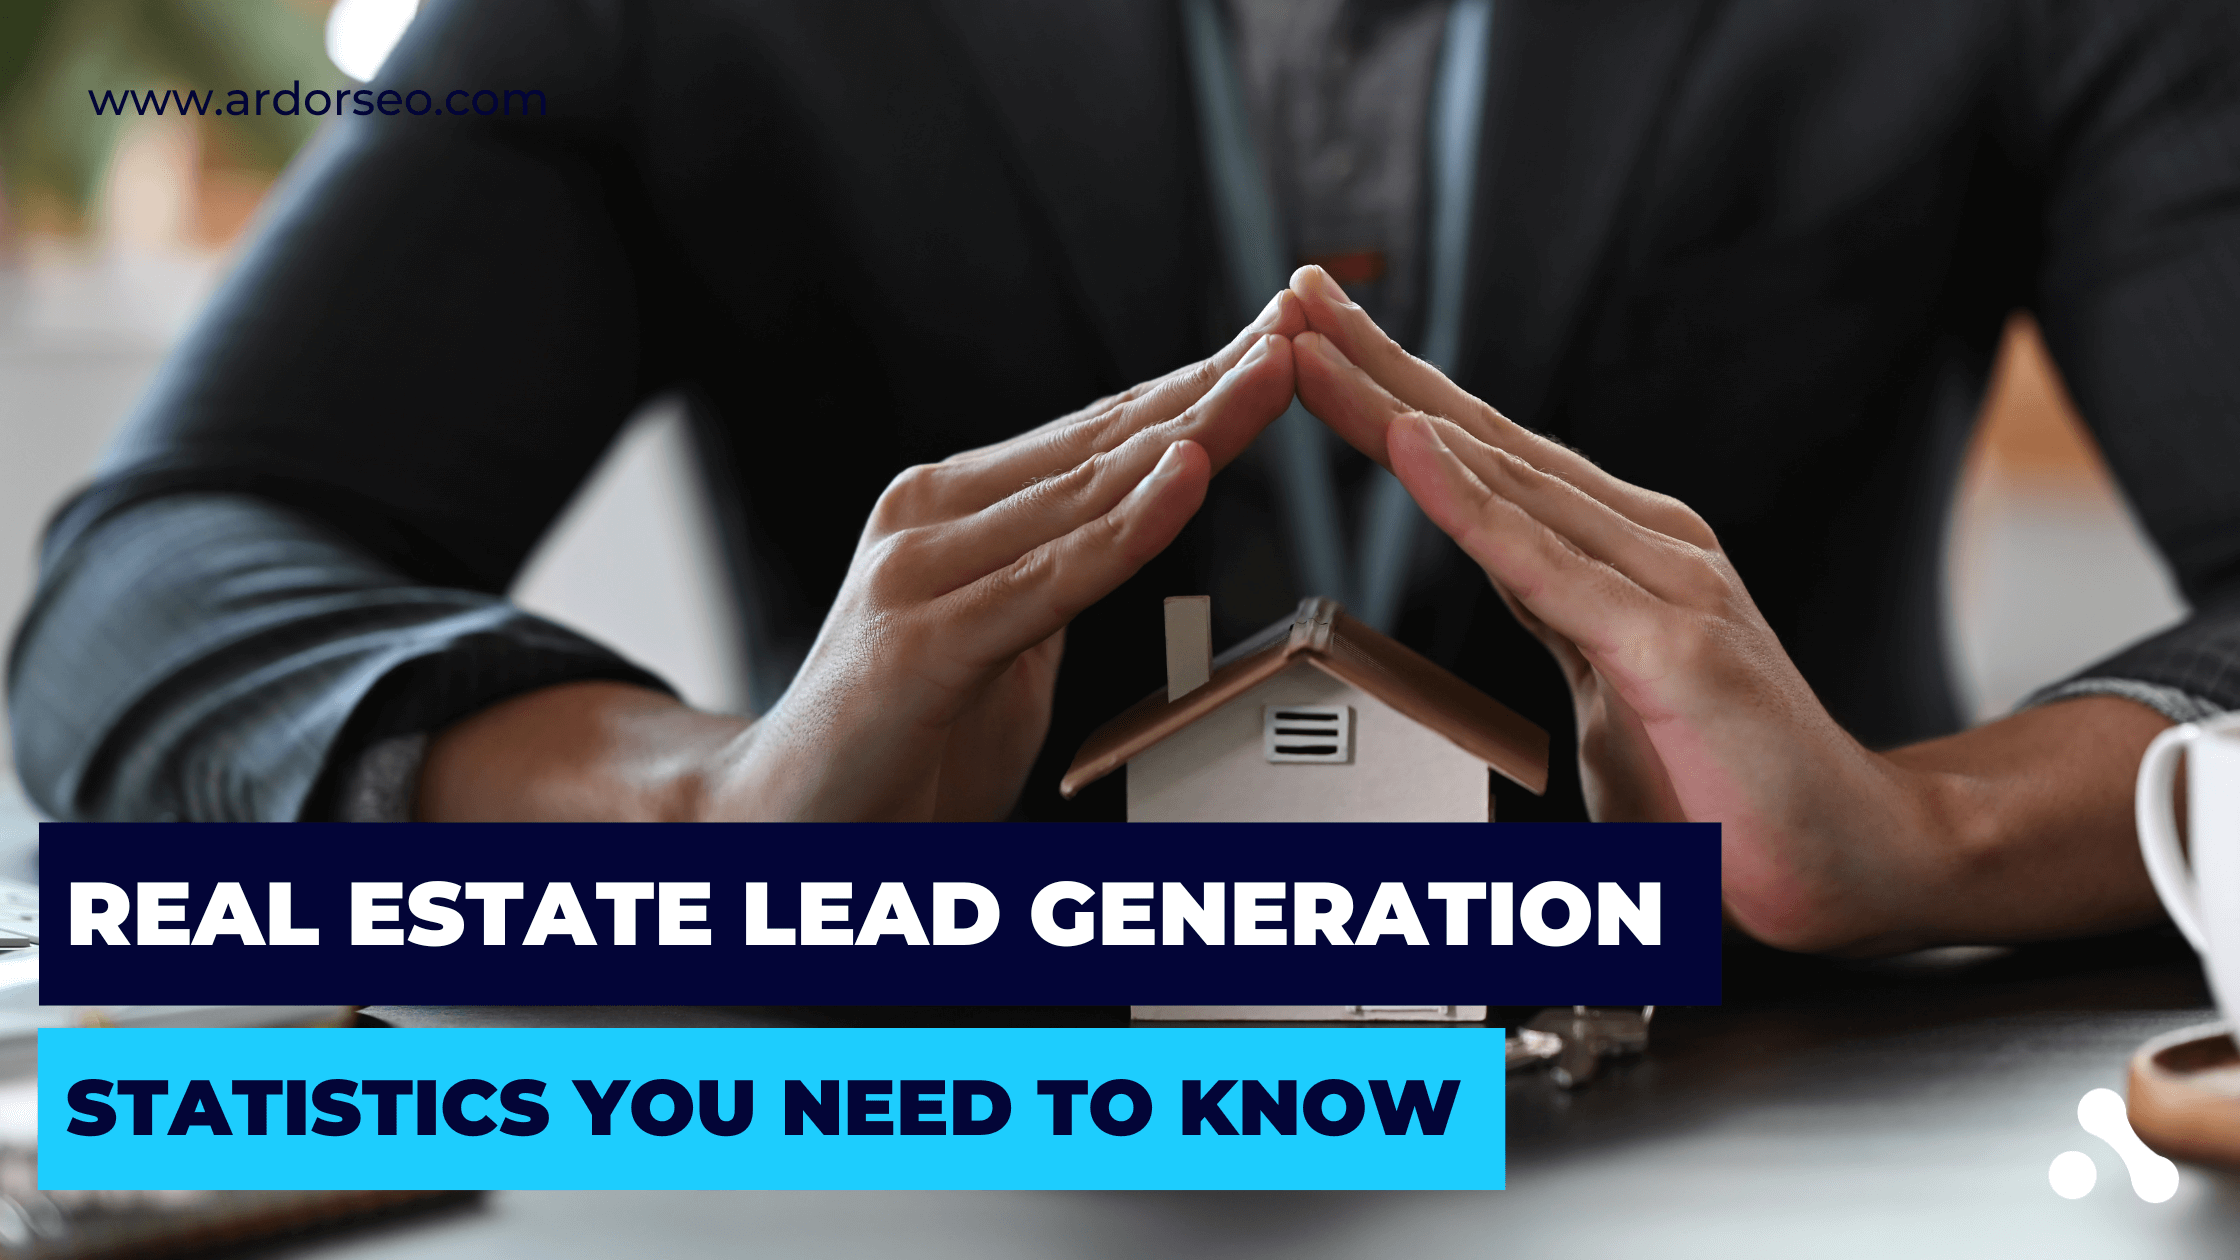 Real estate agent using proven strategies to get high-quality leads.